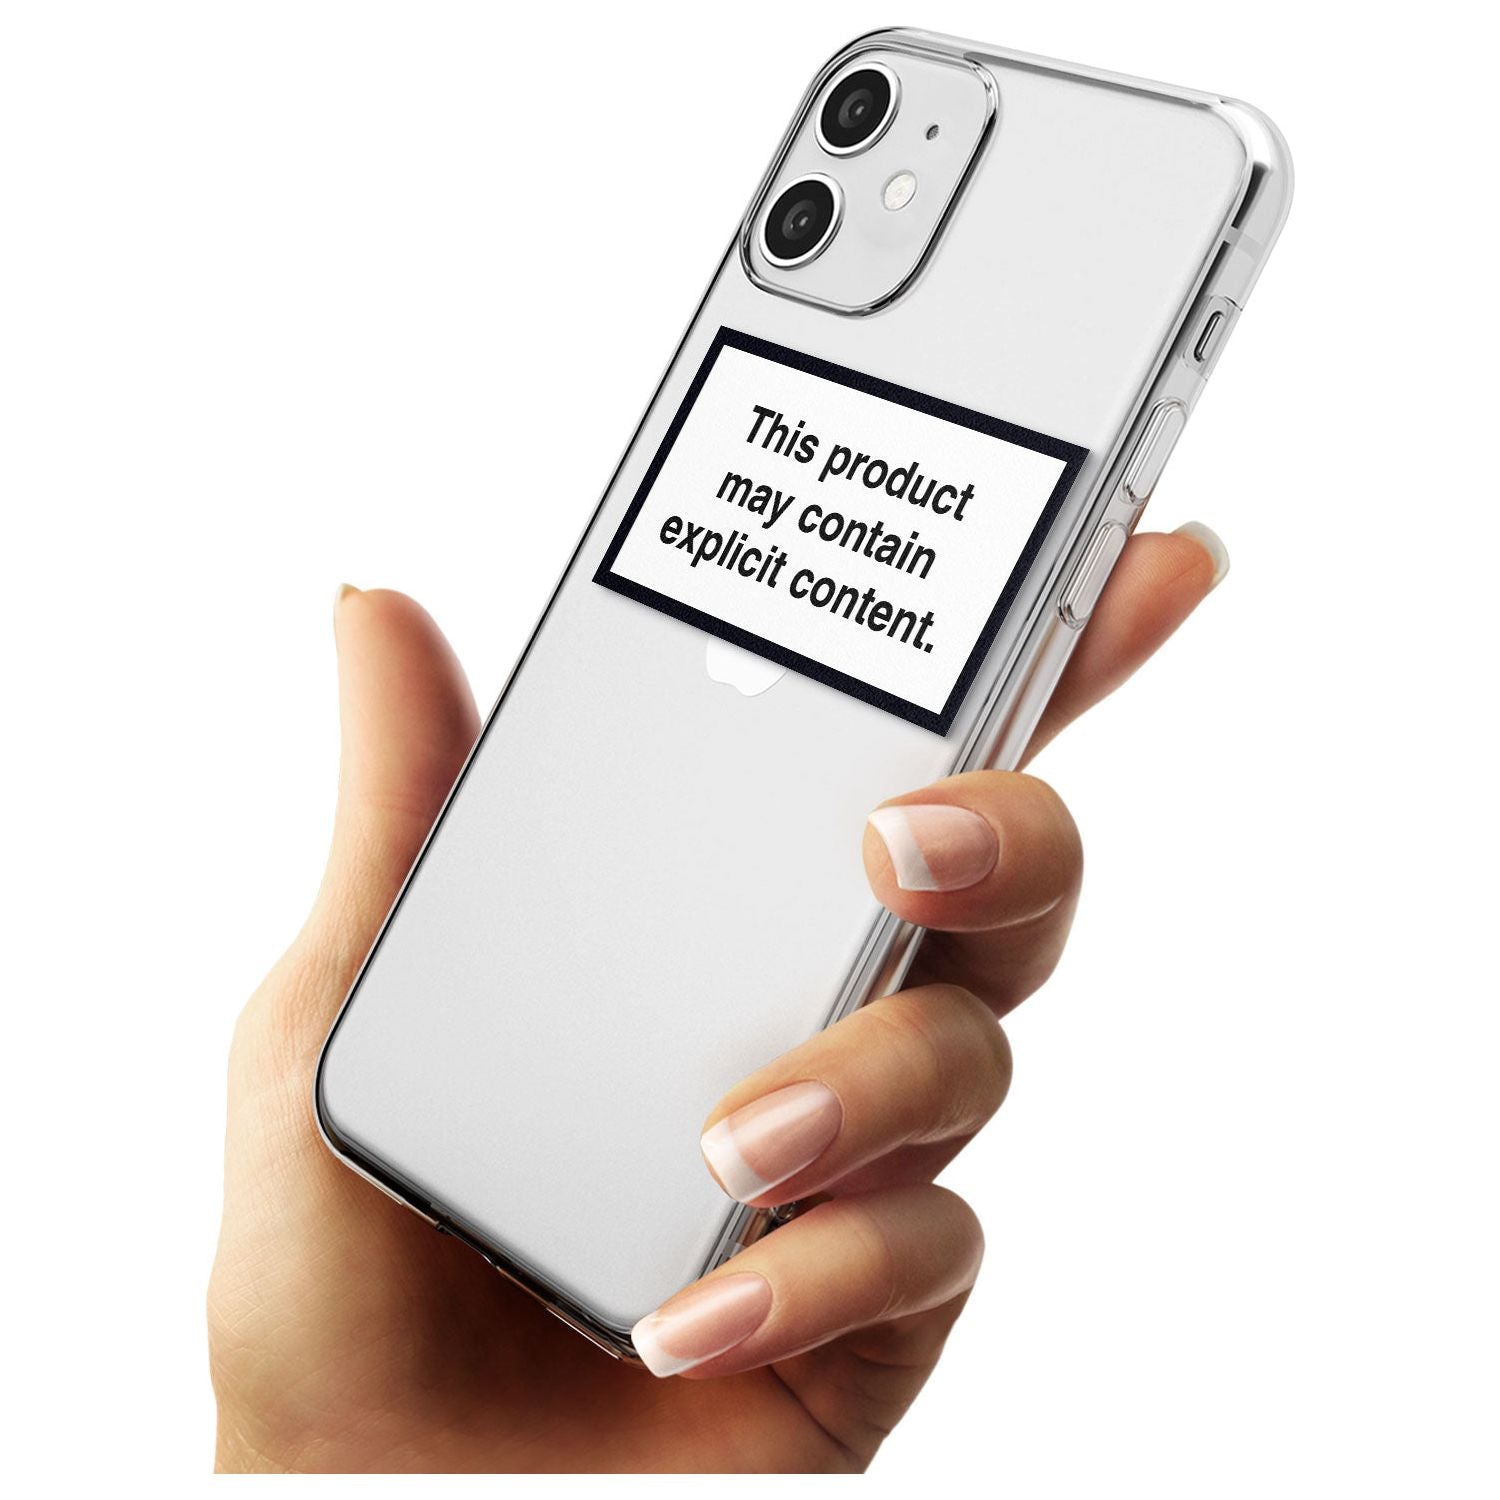 This product may contain explicit content Black Impact Phone Case for iPhone 11